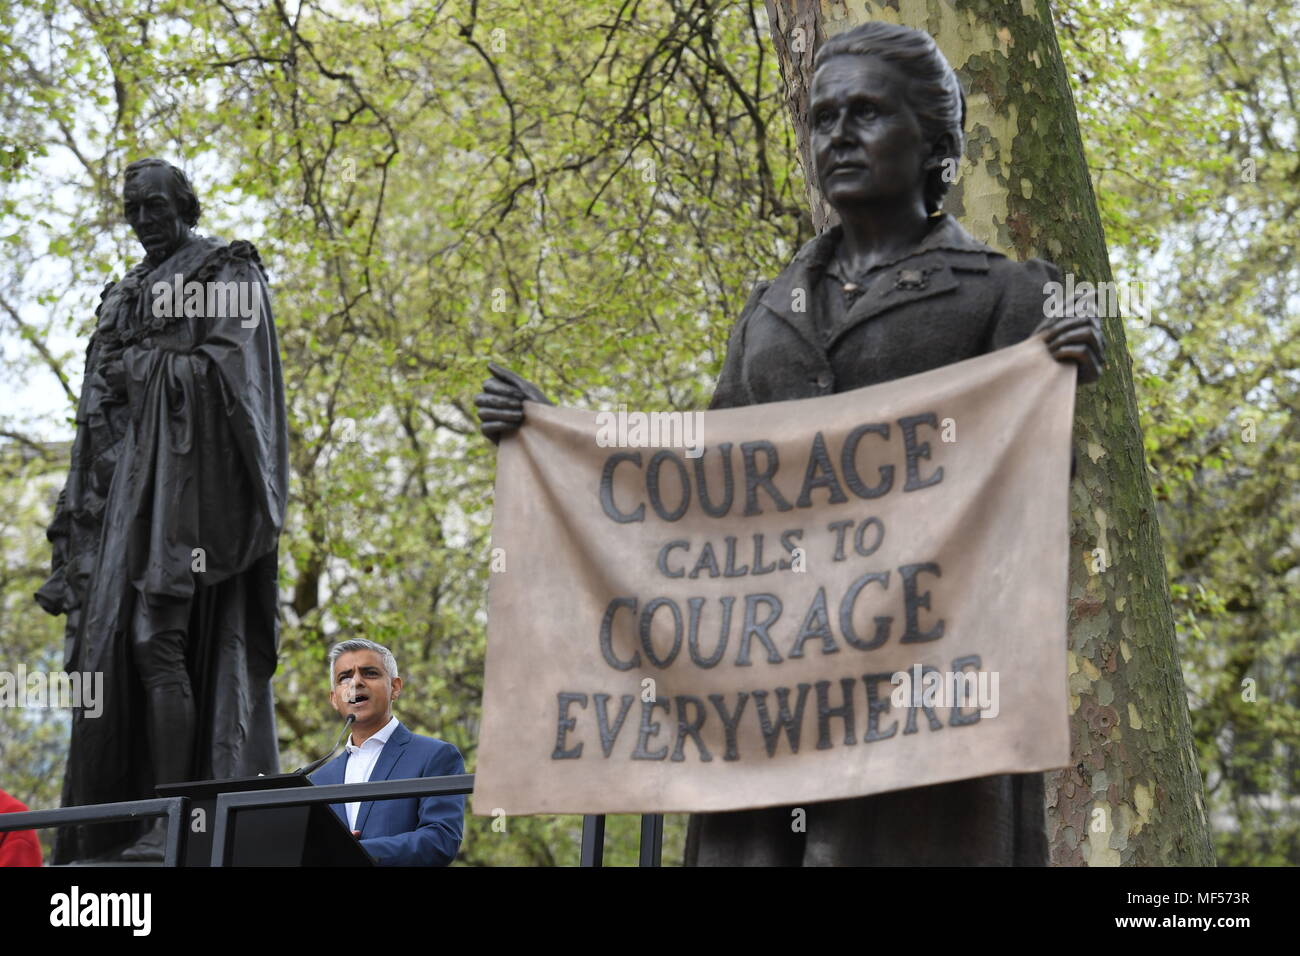 Mayor of London Sadiq Khan at the unveiling of the statue of suffragist leader Millicent Fawcett, in Parliament Square, London. Stock Photo